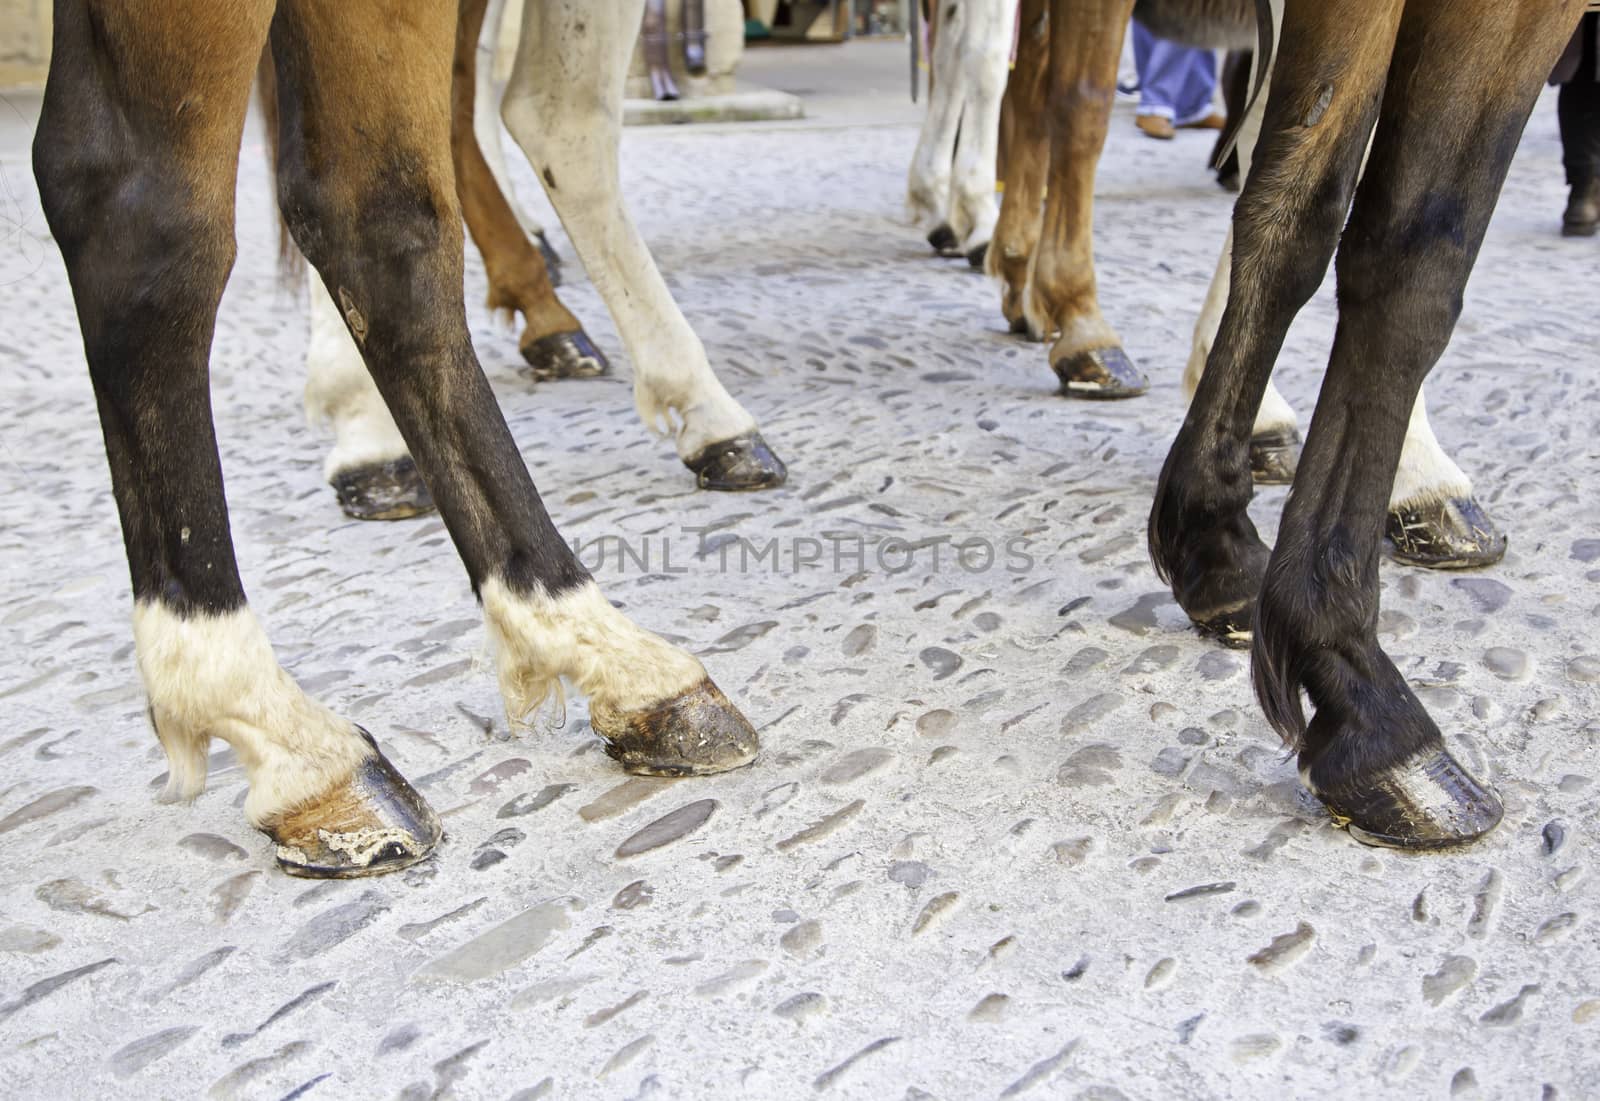 Legs of horses, detail of horses in an exhibition in the city